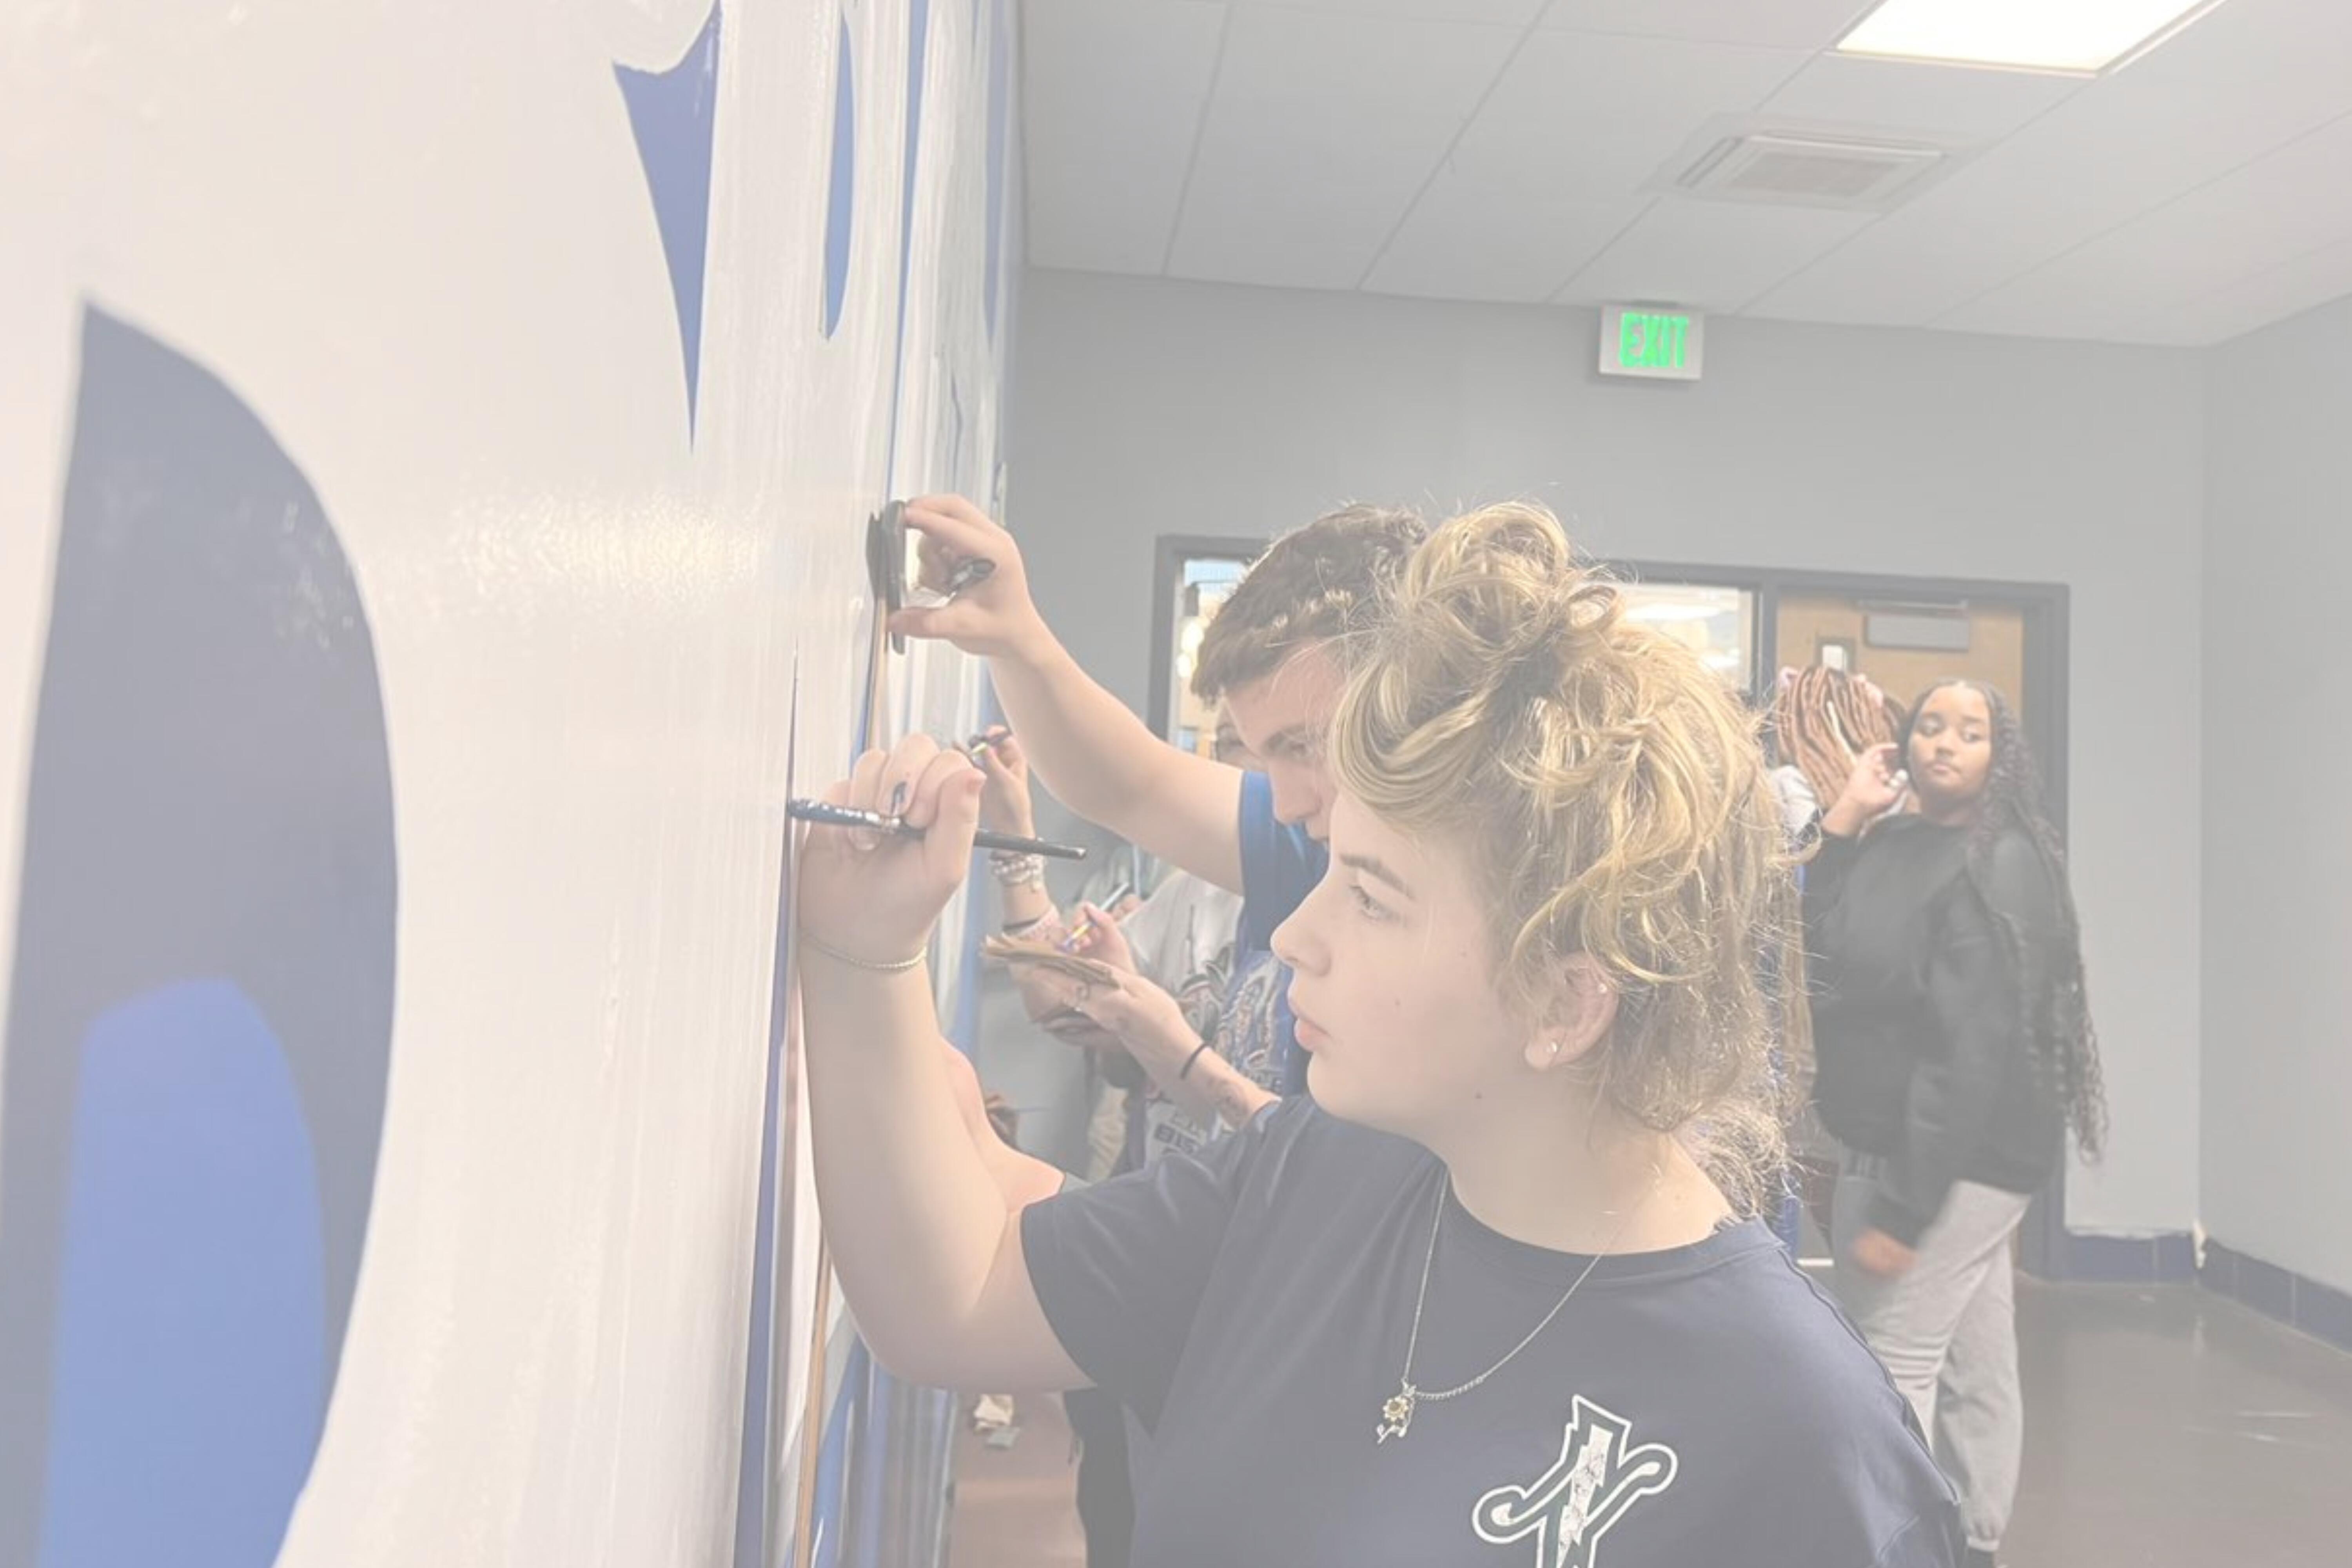 Student painting the wall